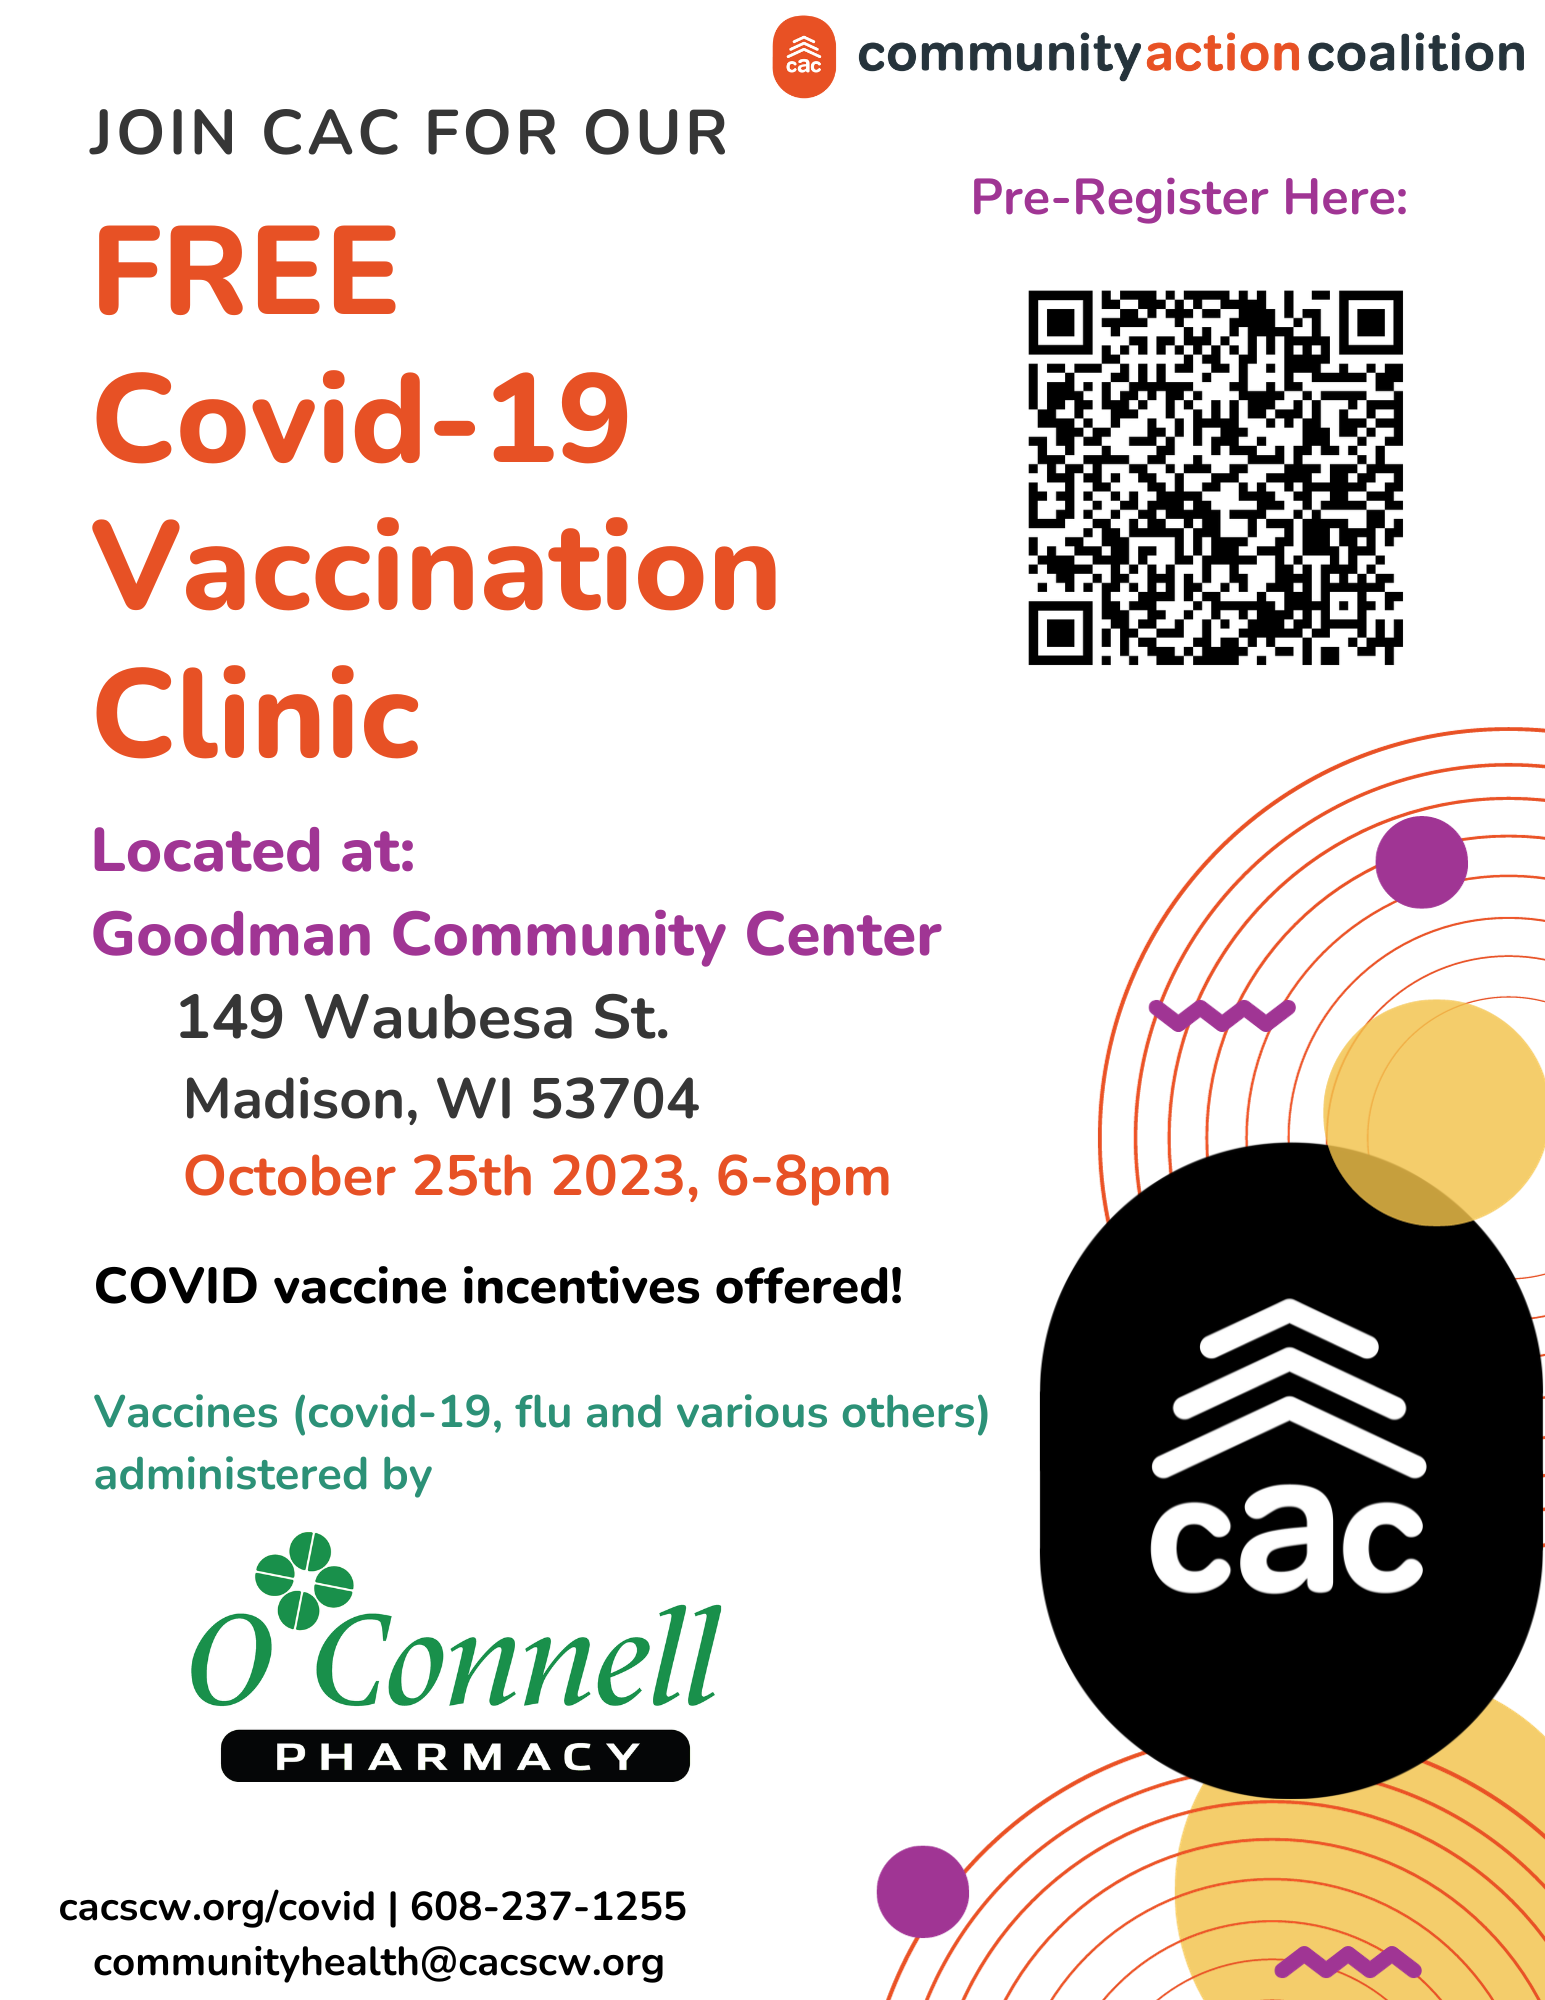 Oct. 25, 2023 Free Vaccination Clinic